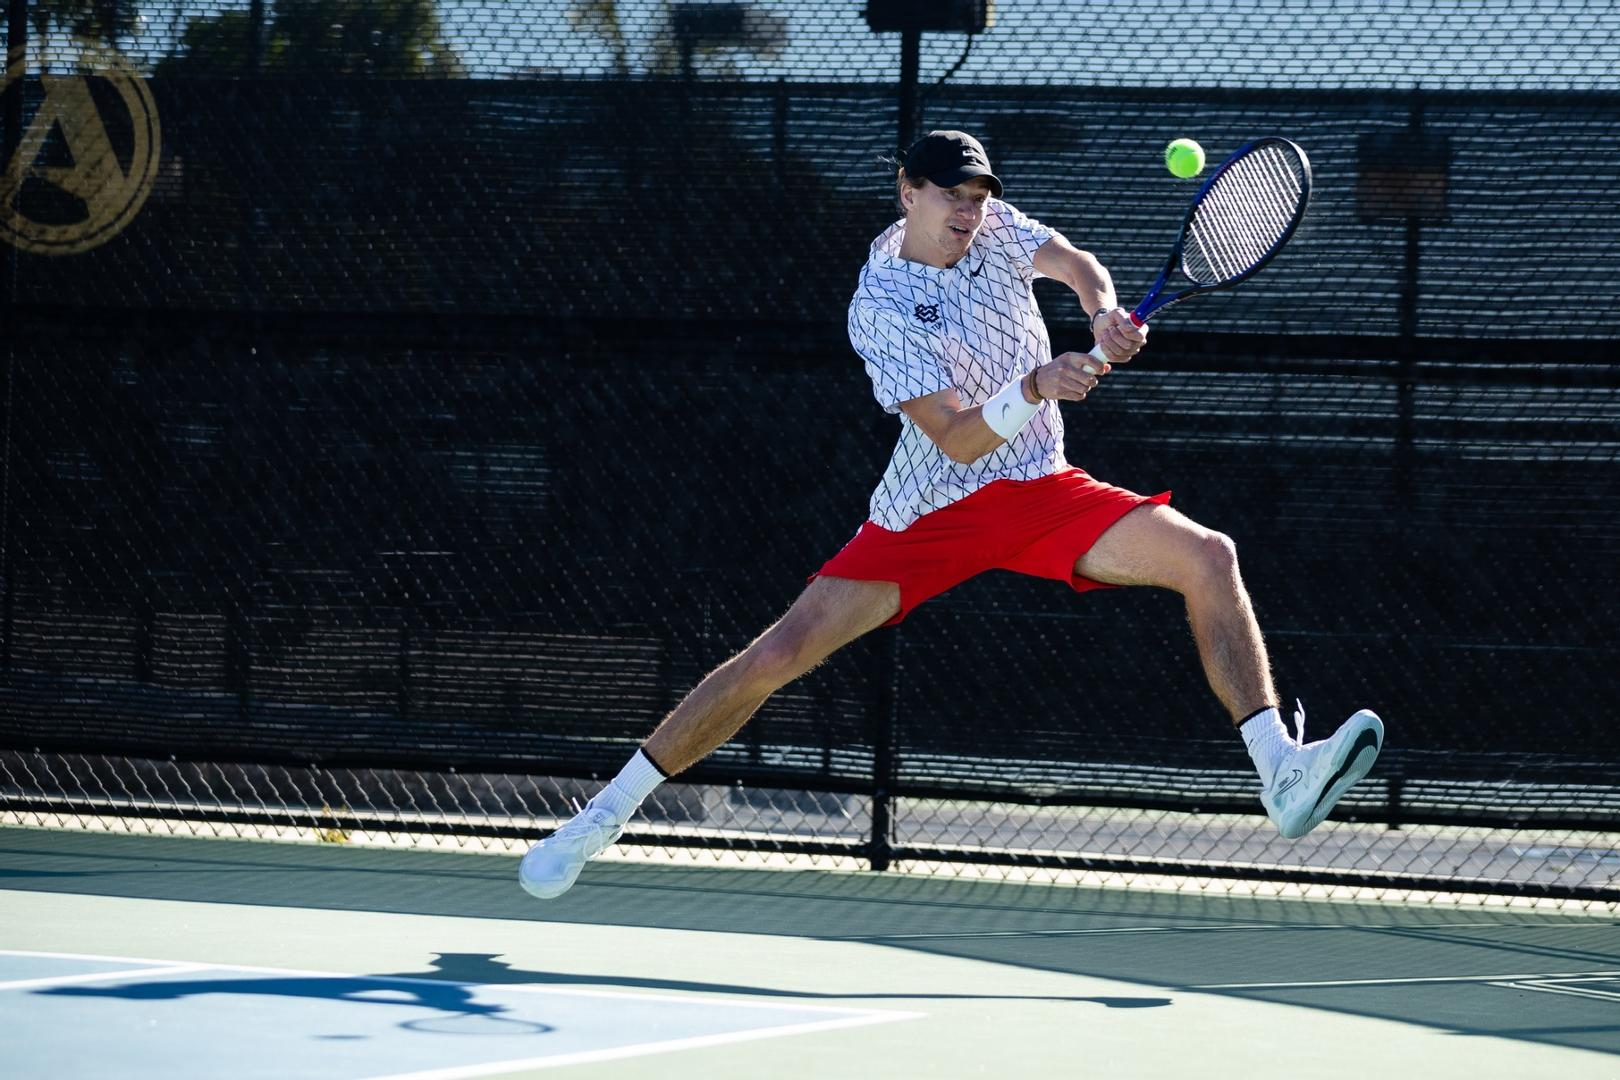 Aztecs Take Down Nevada 4-1 to Advance to Semis – Mountain West Conference